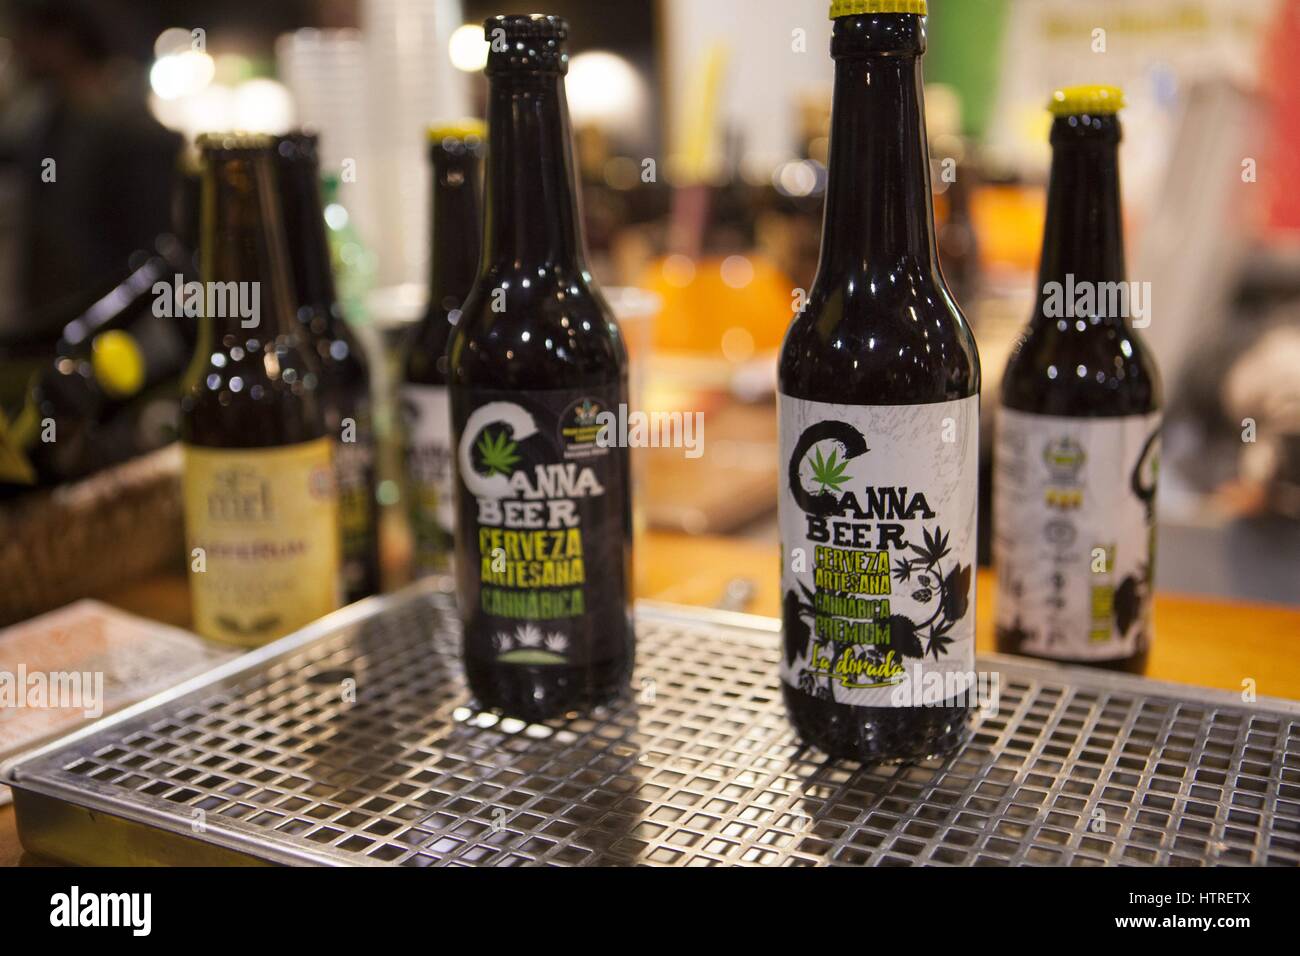 Cannabis beer at Canapa Mundi the international hemp fair, now in its fourth edition, with products related to food, handicraft, cosmetics and hemp cu Stock Photo